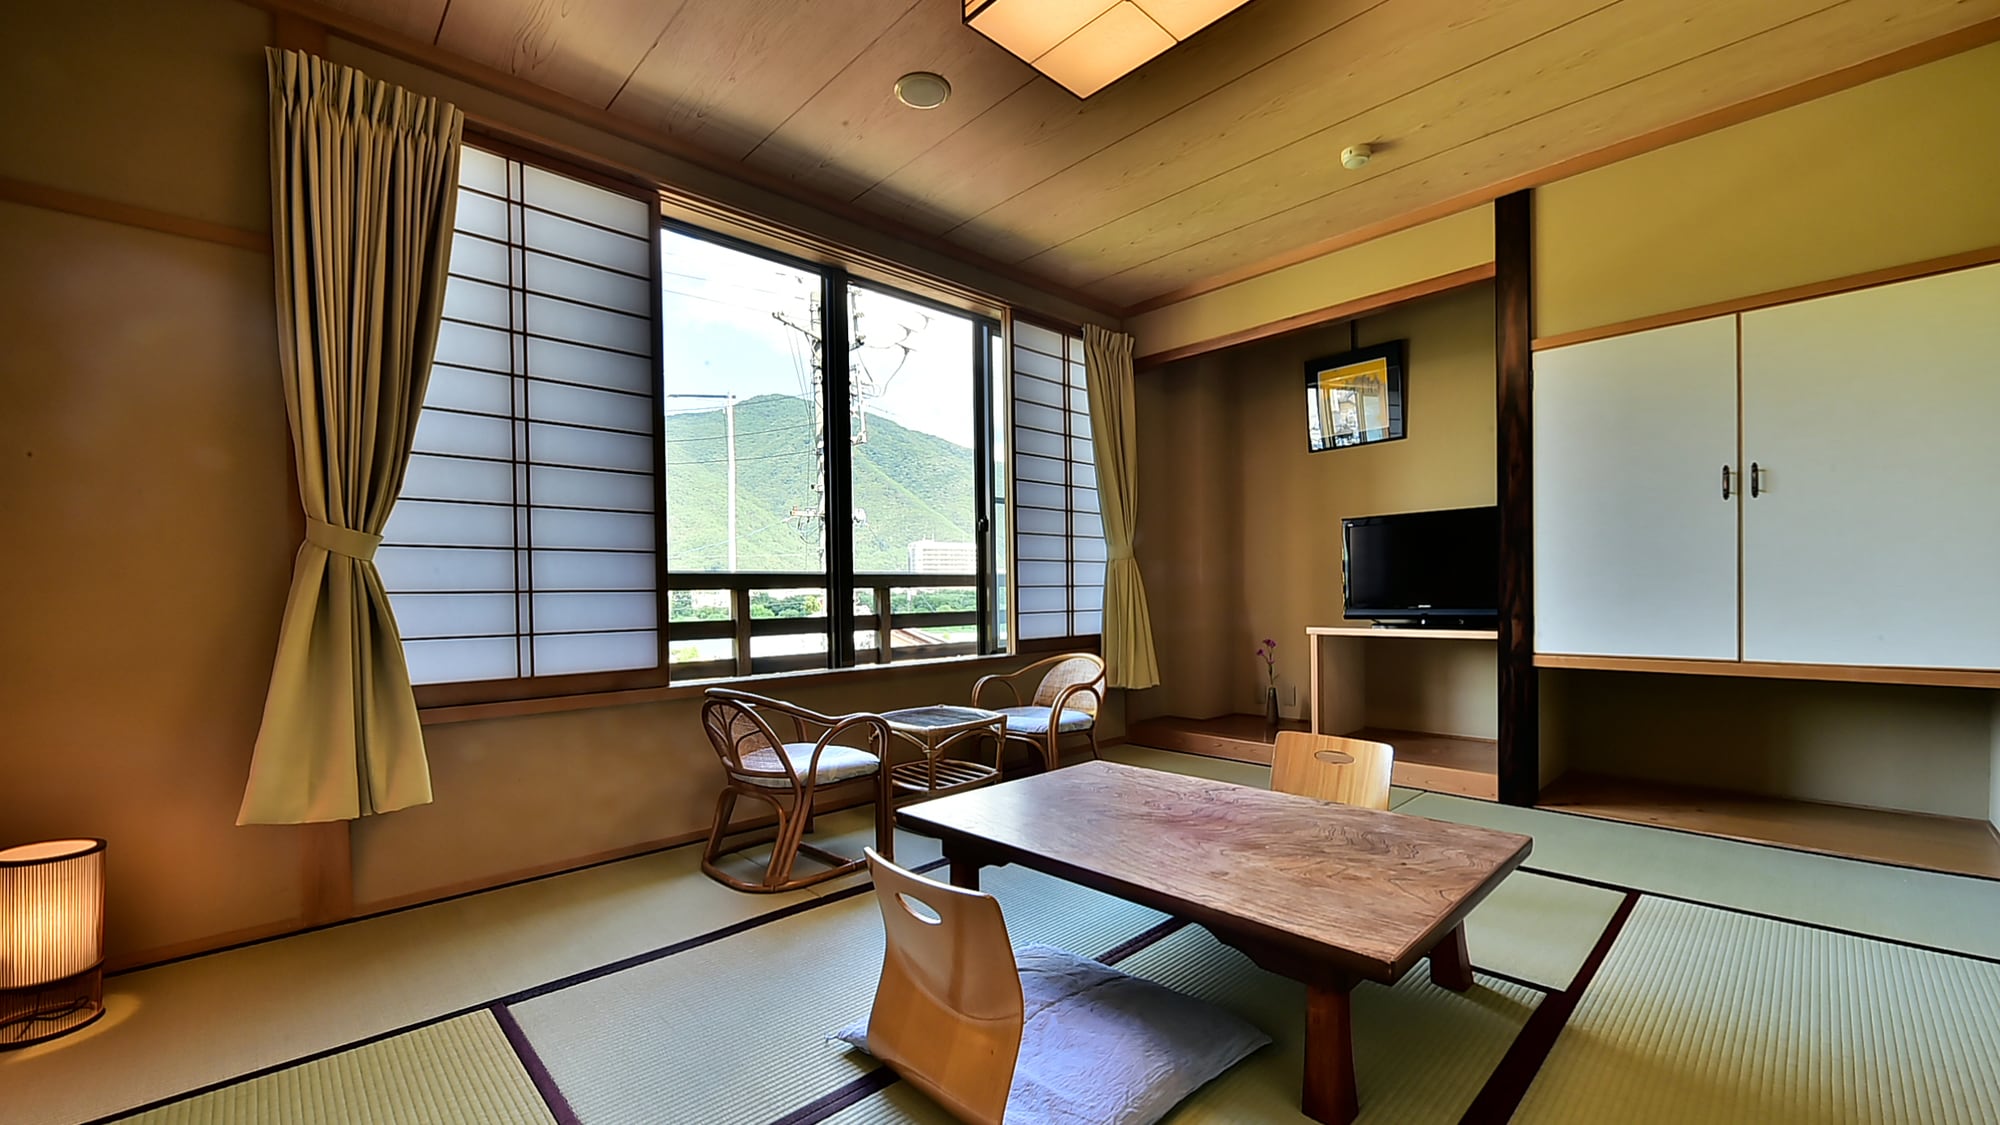 An example of a Japanese-Western style room in the main building "Tozenkaku" (Japanese-style room space)